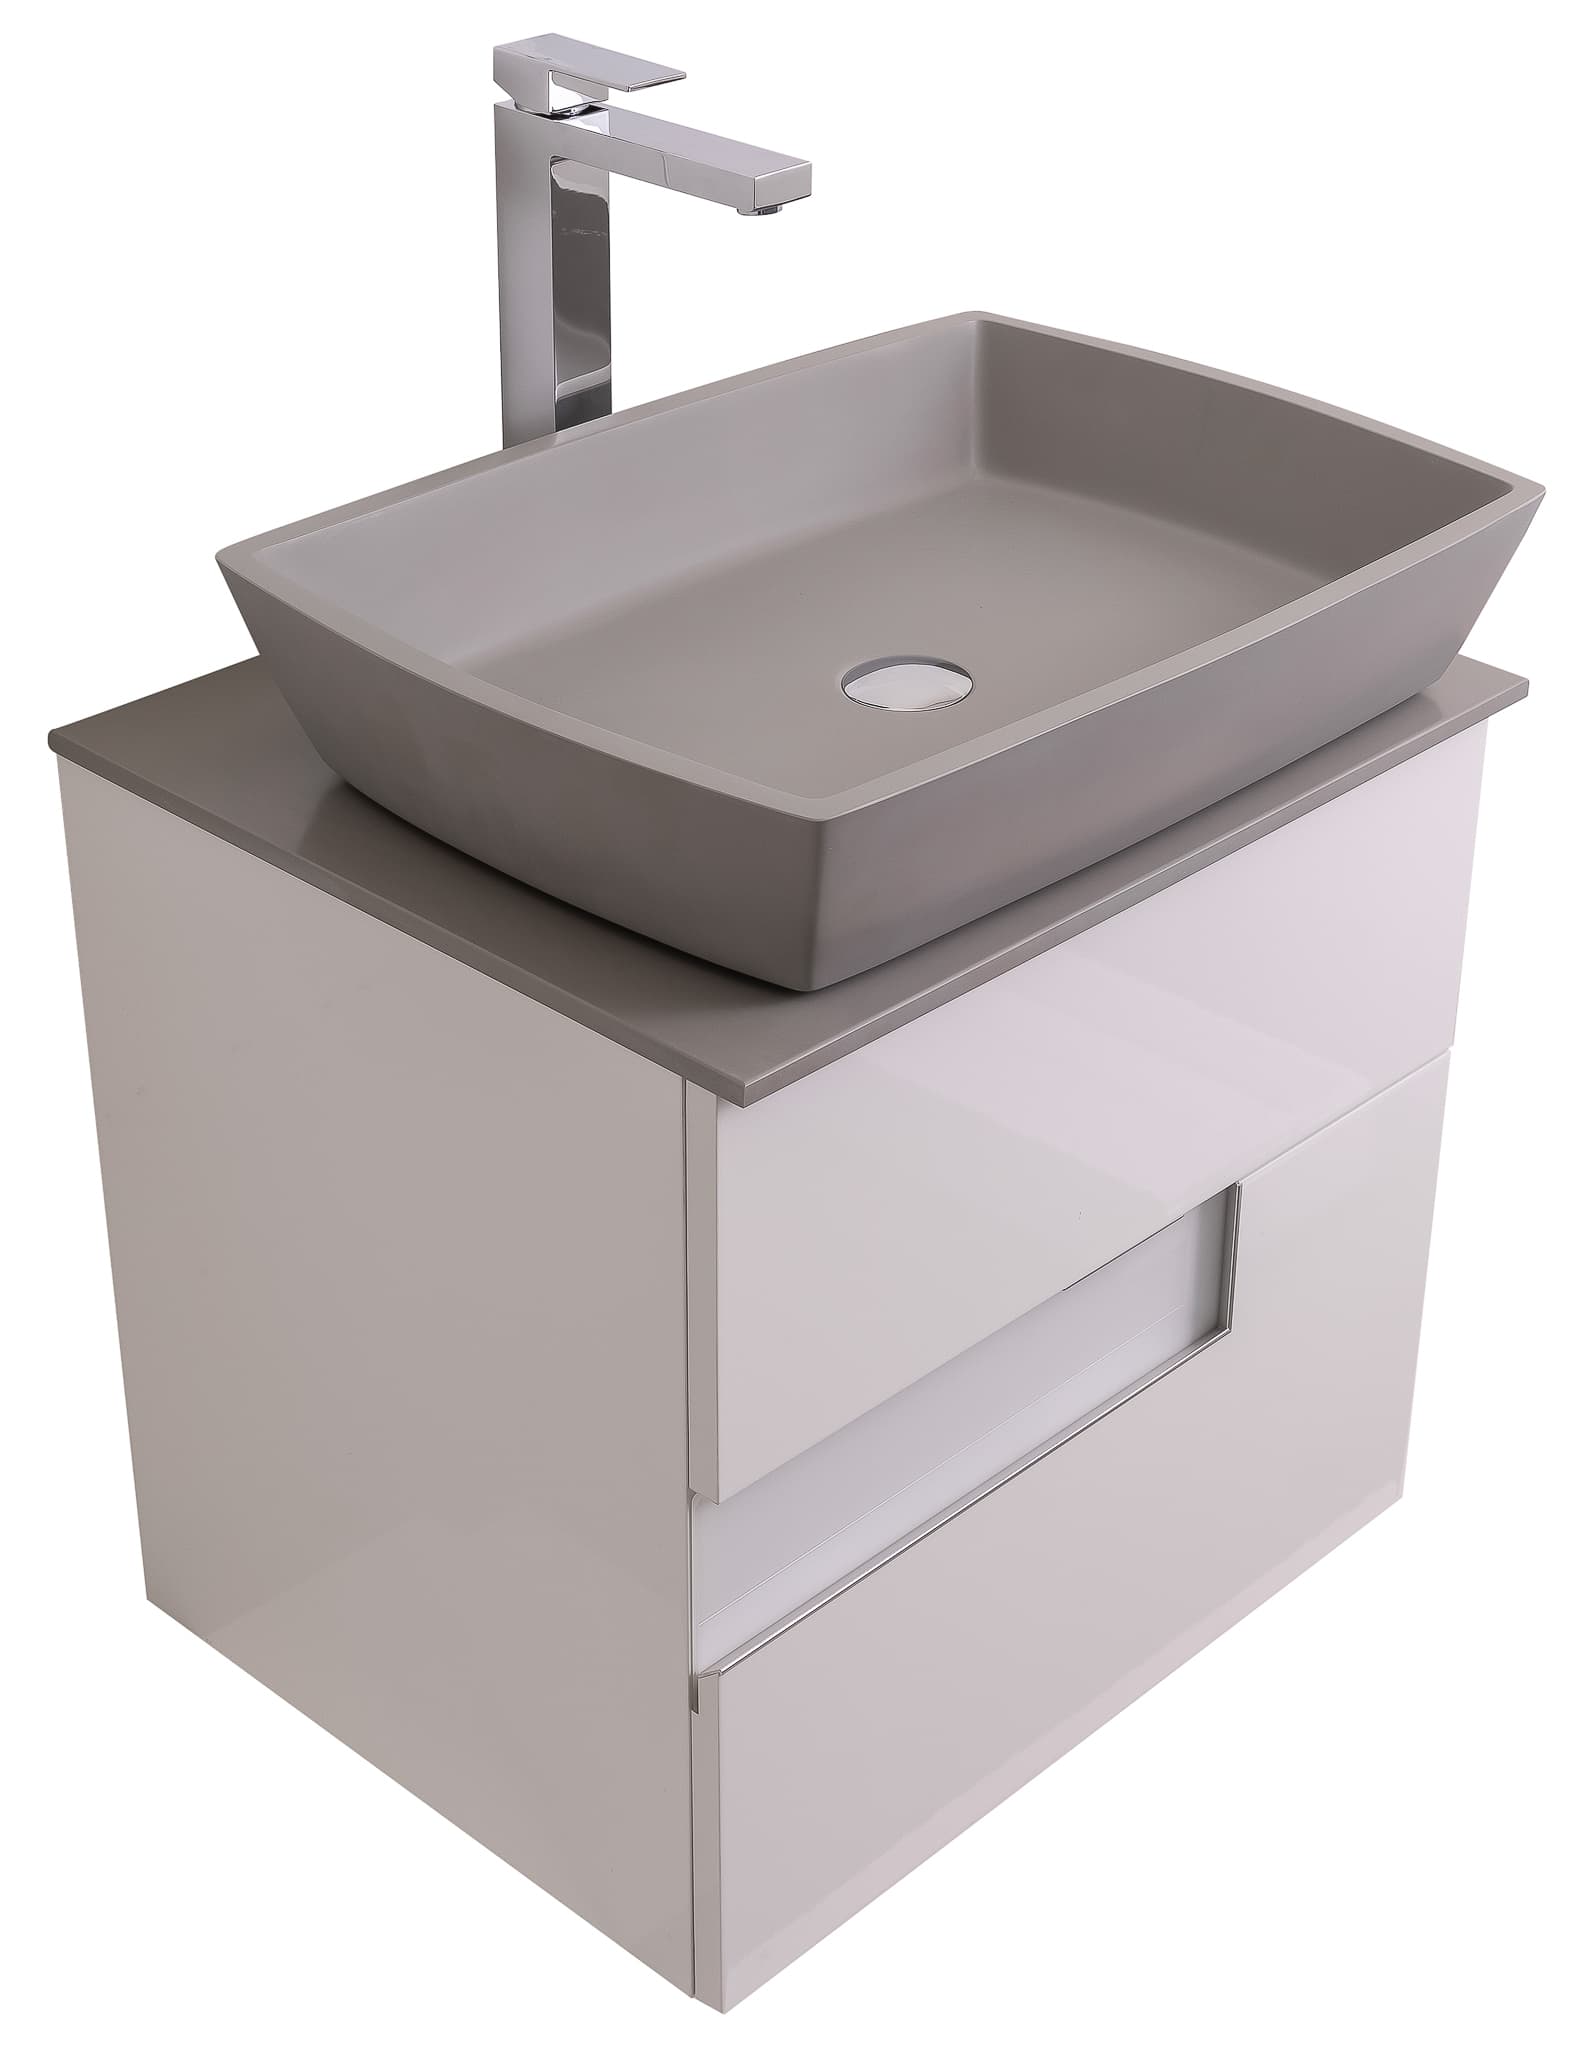 Vision 23.5 White High Gloss Cabinet, Solid Surface Flat Grey Counter And Square Solid Surface Grey Basin 1316, Wall Mounted Modern Vanity Set